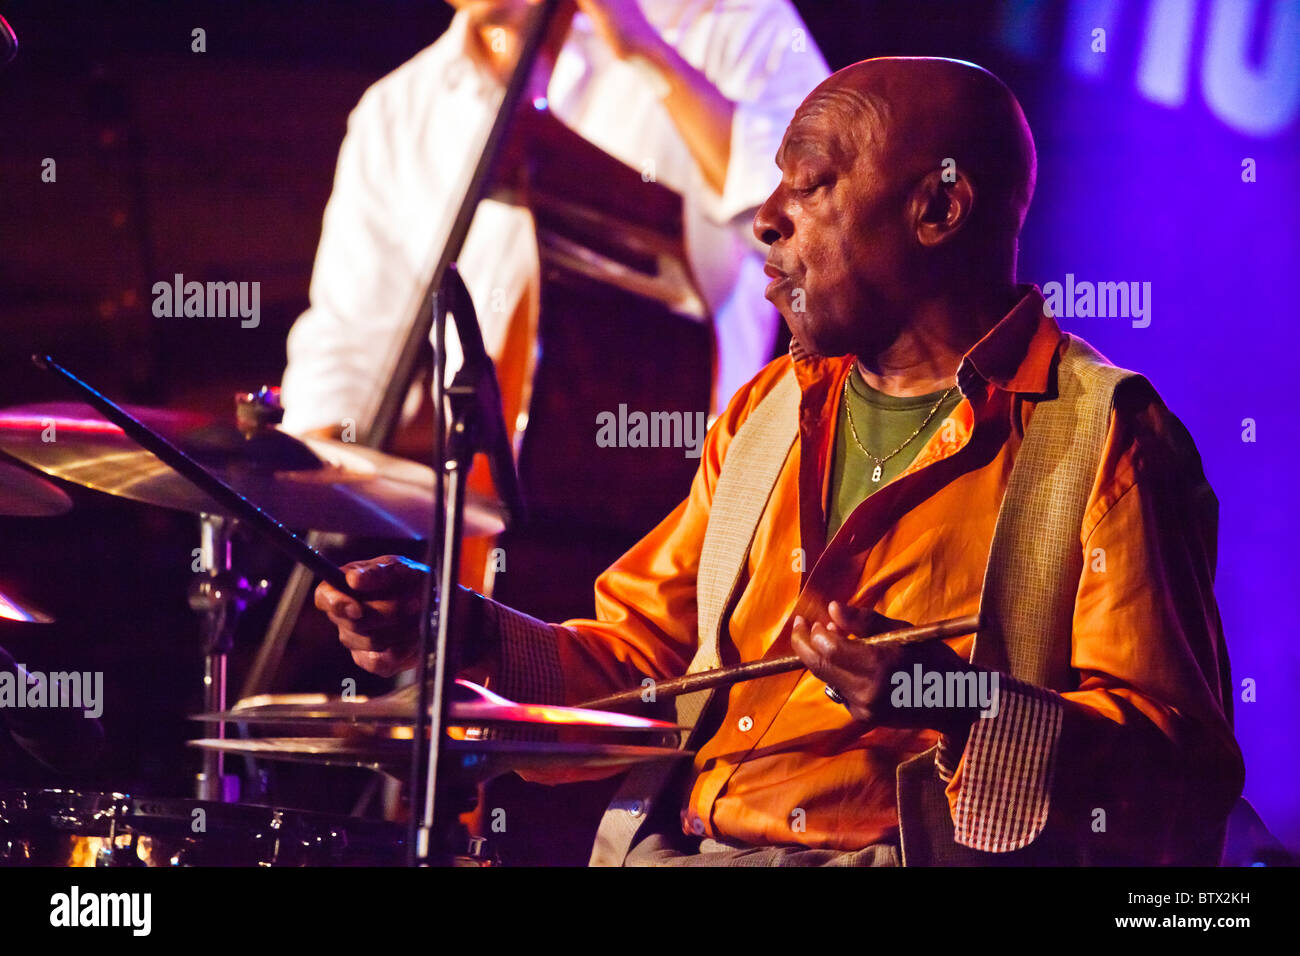 ROY HANES plays drums with his FOUNTAIN OF YOUTH BAND in Dizzys Den - 2010 MONTEREY JAZZ FESTIVAL, CALIFORNIA Stock Photo